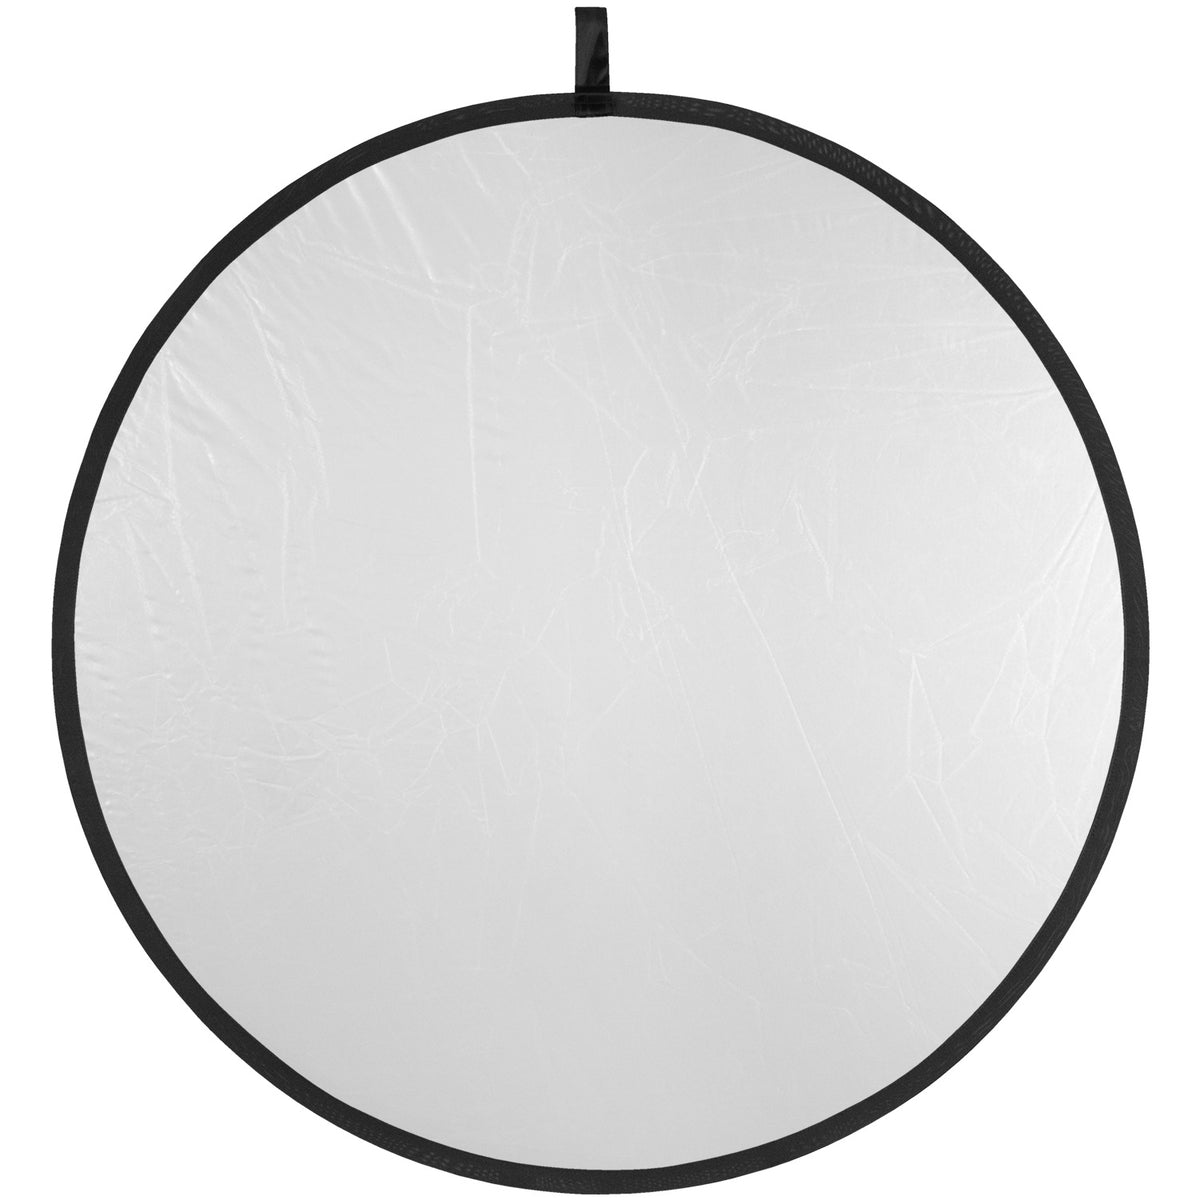 Collapsible 2-in-1 Sunlight/White Bounce Reflector (40")